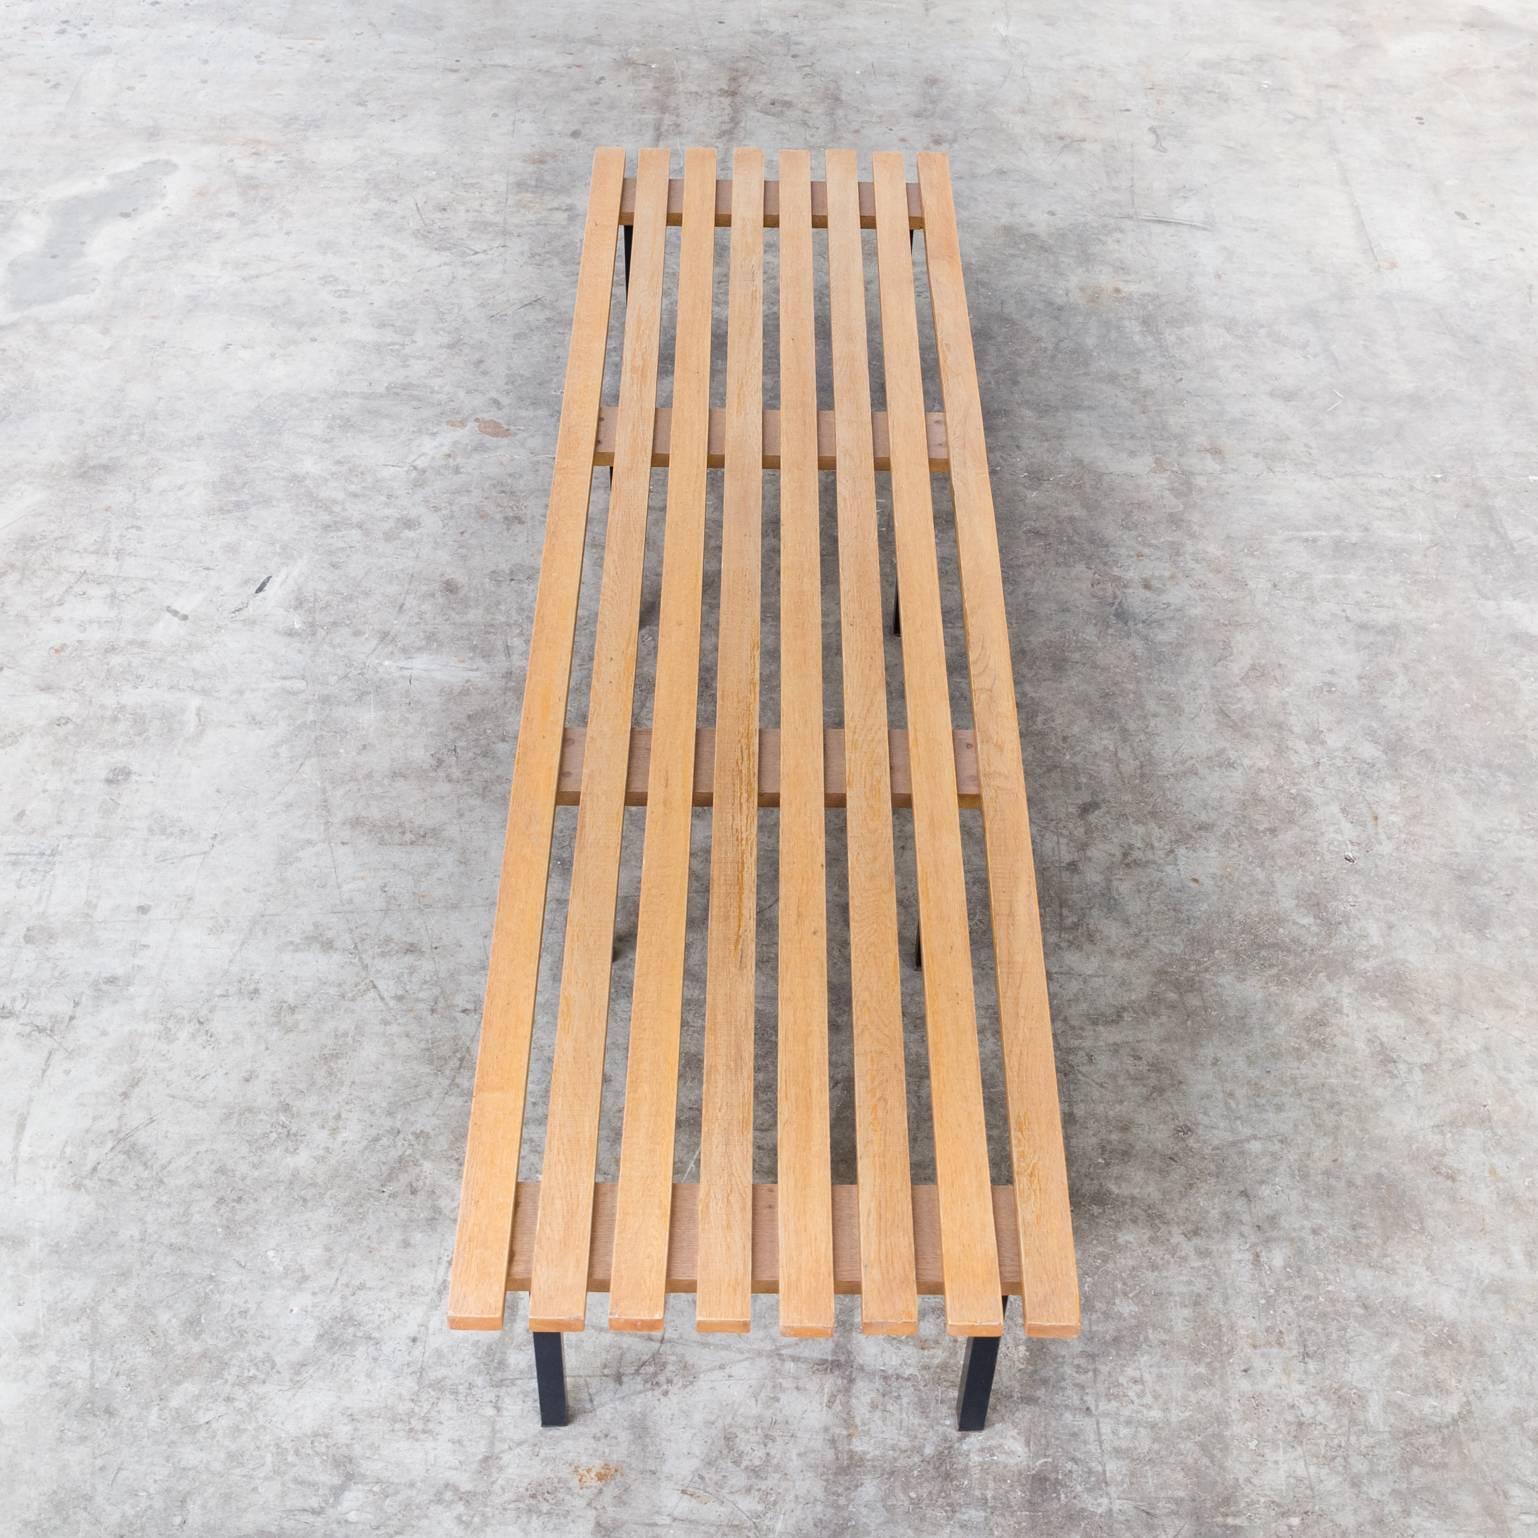 Midcentury Wooden Slatted Bench with Fabric Cushion For Sale 2